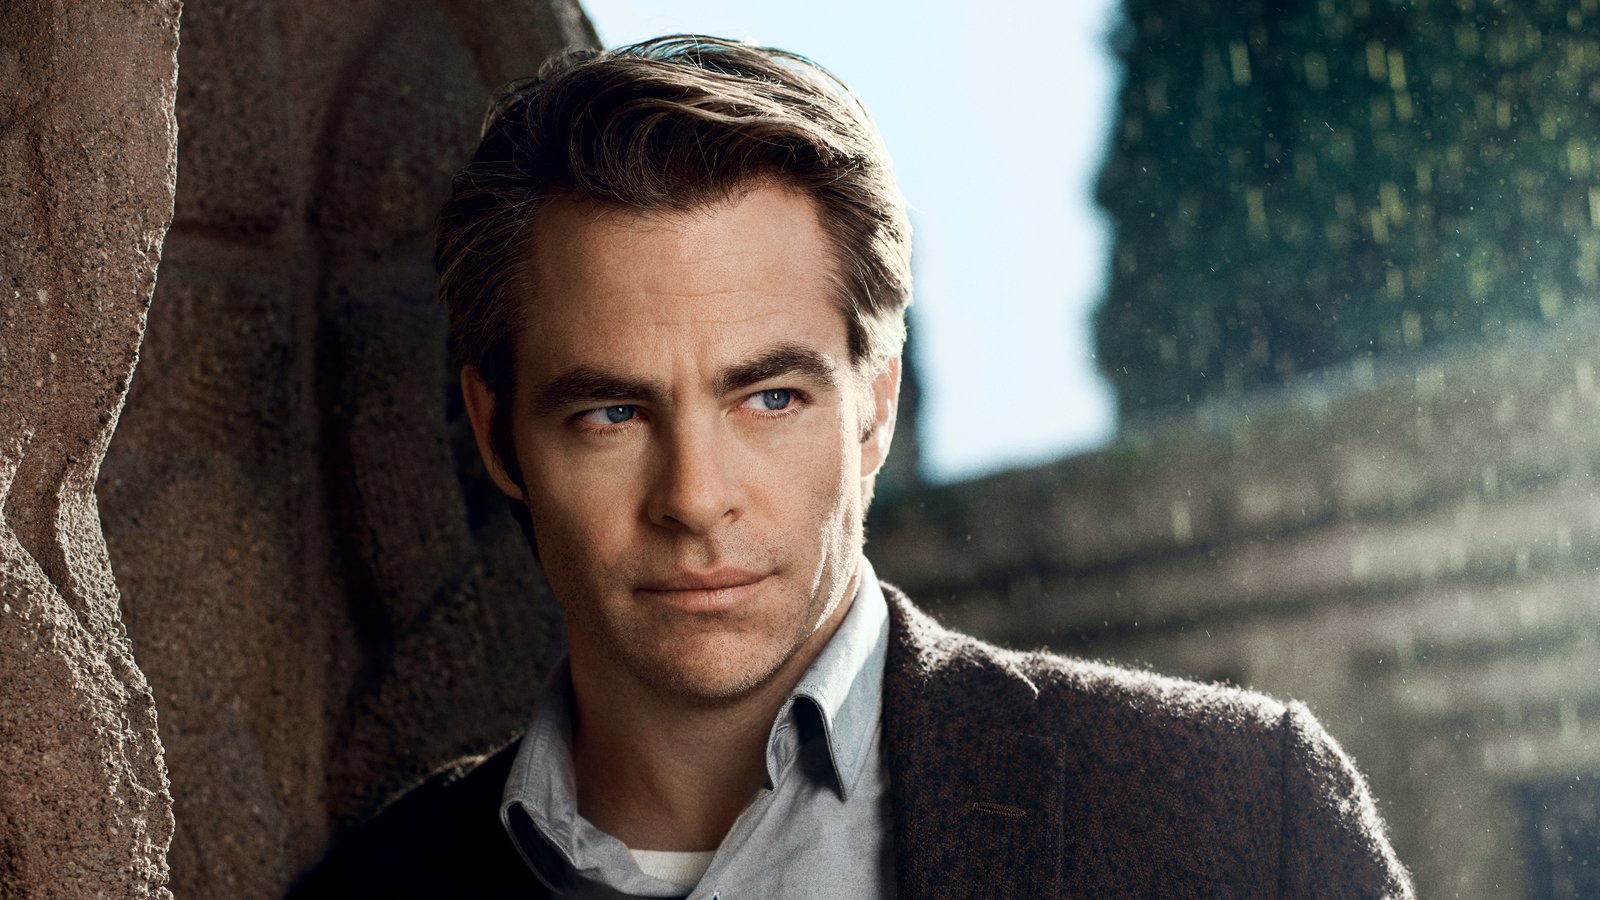 An Overlooked Chris Pine Movie Is Coming to Netflix This Week